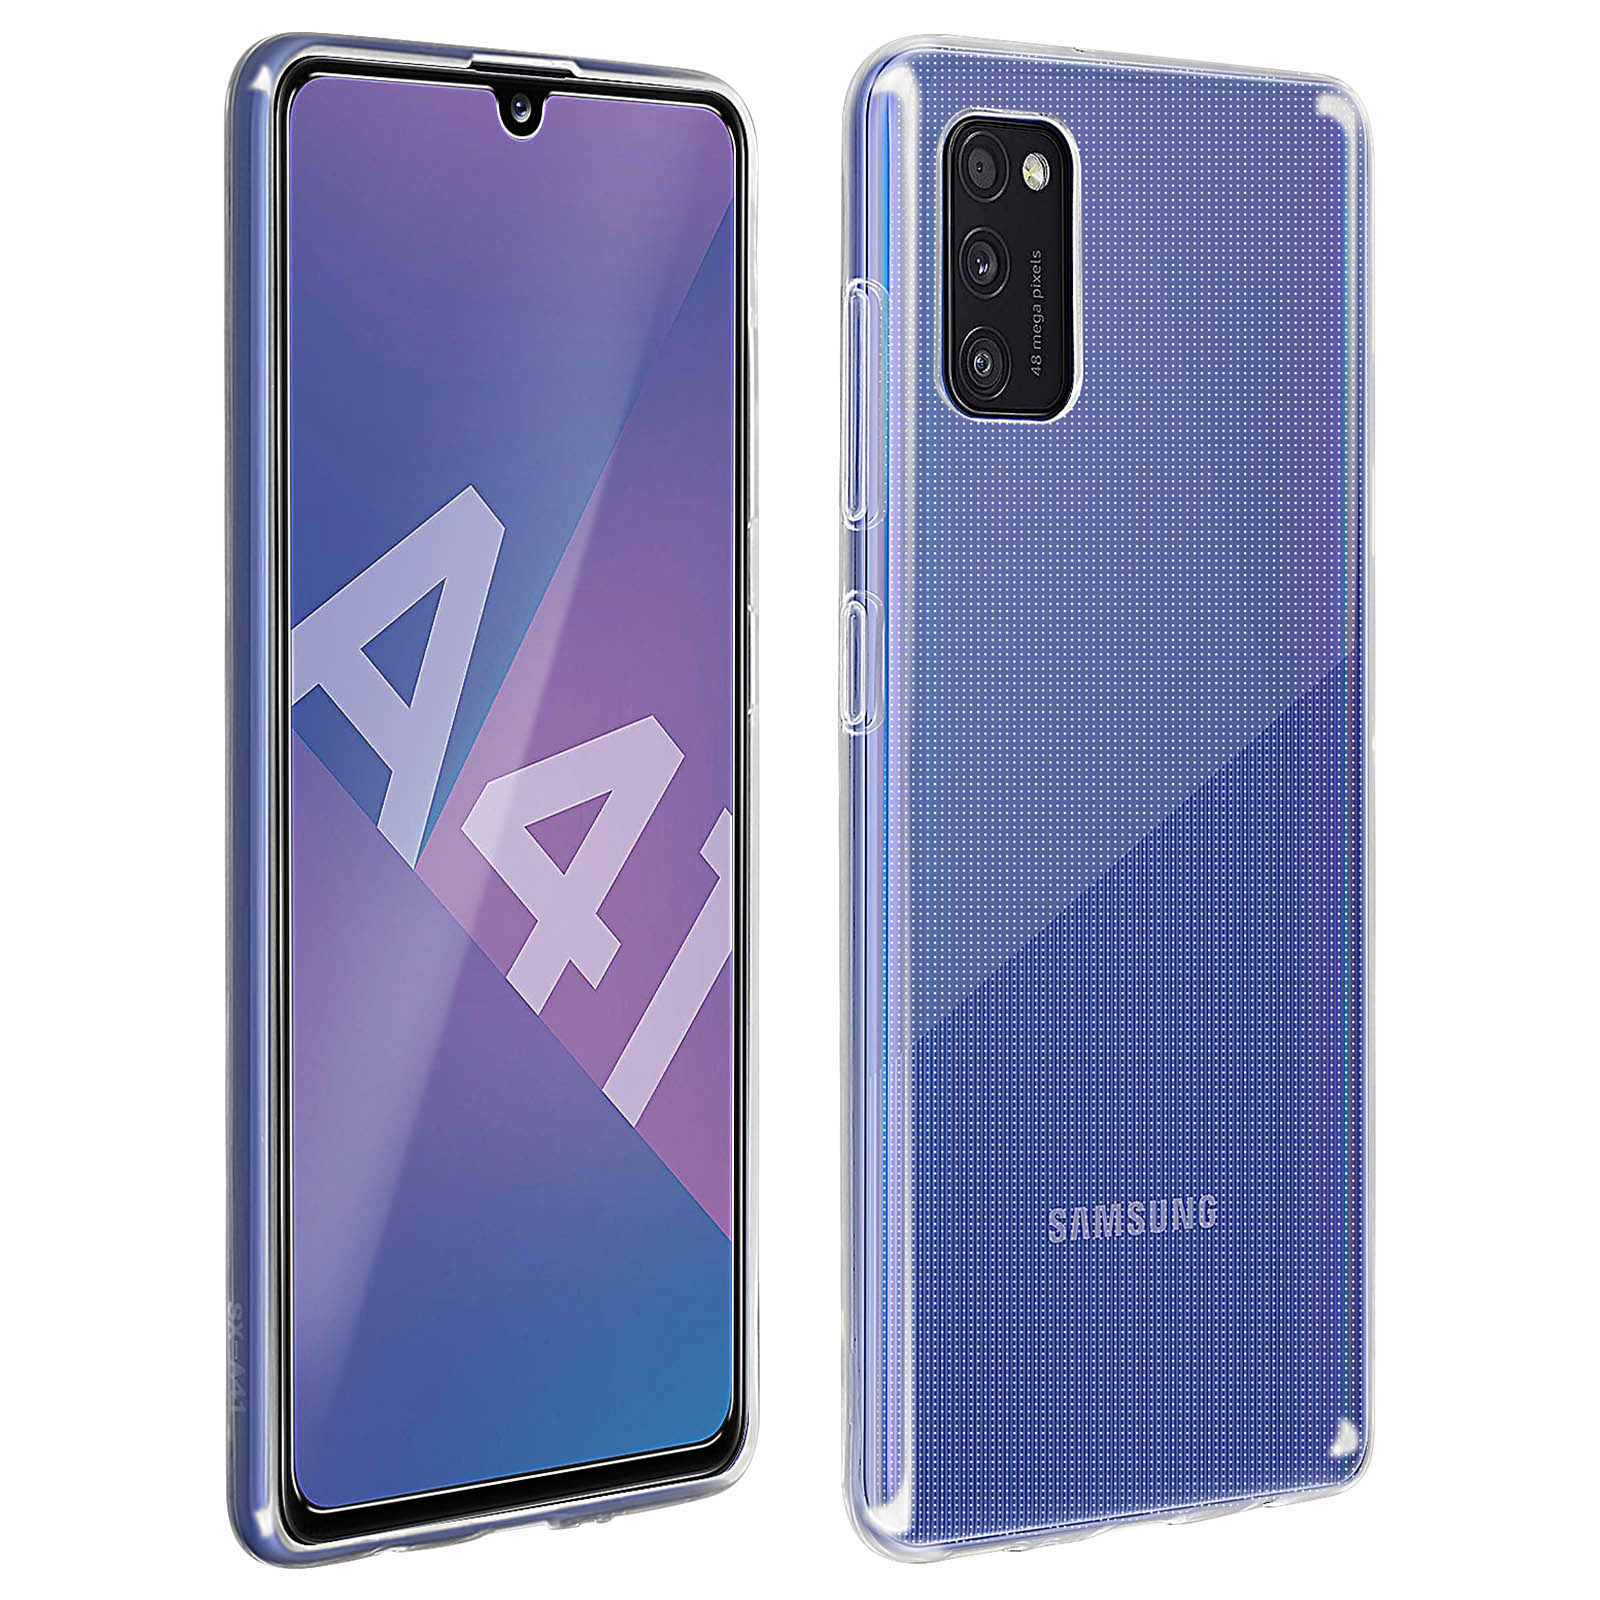 Pack Protection Samsung Galaxy A41 : Coque Silicone Gel + Film